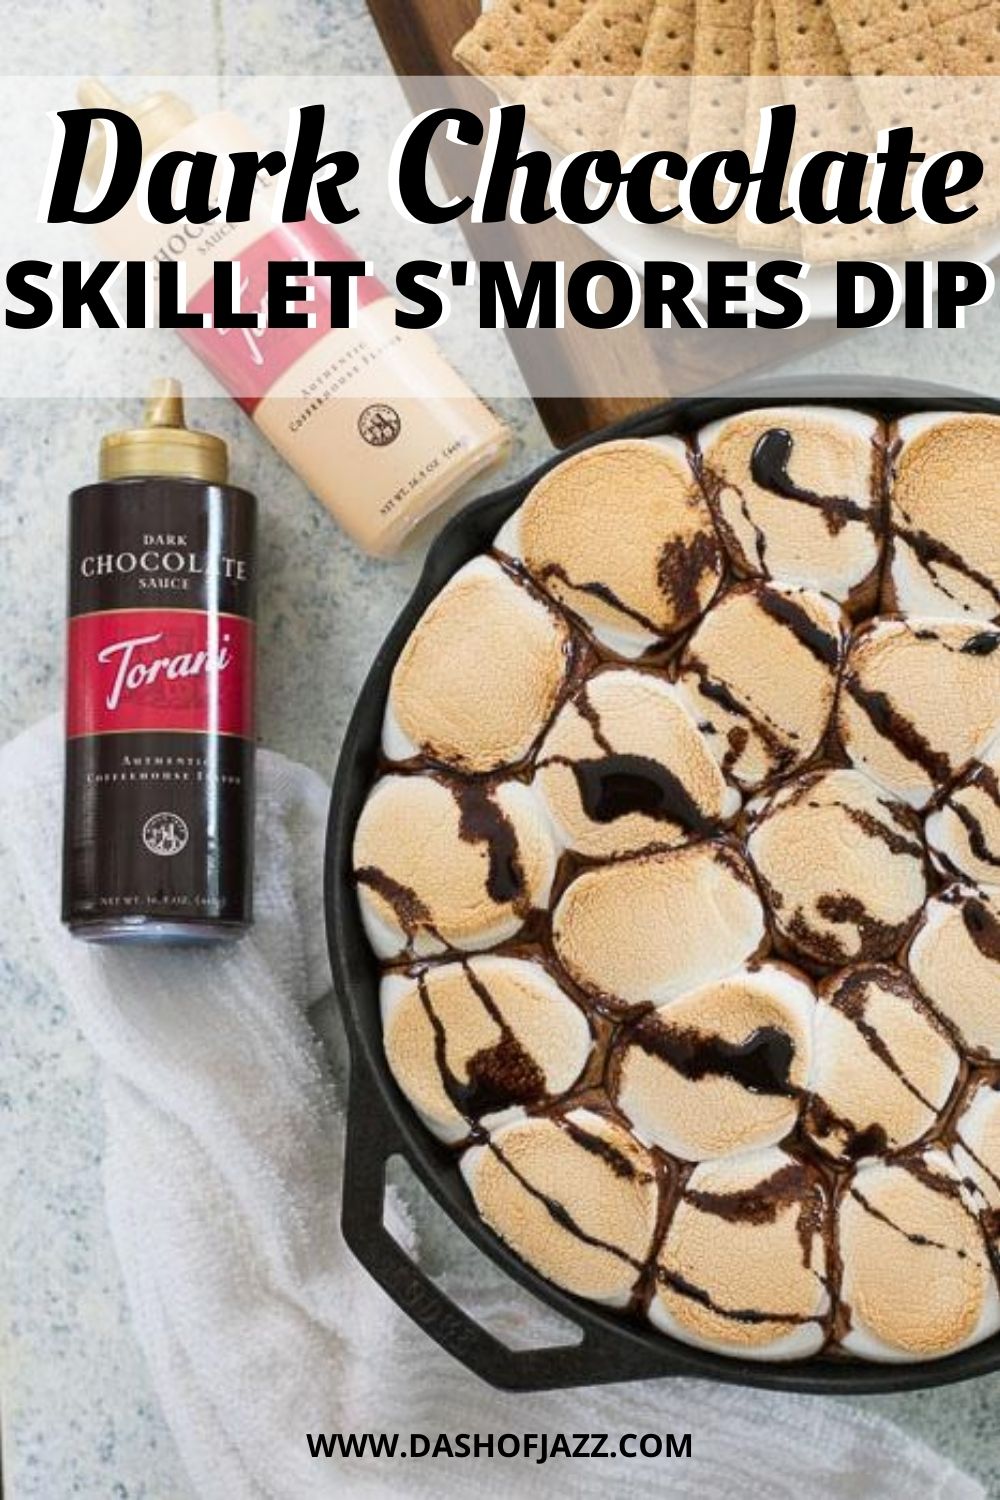 dark chocolate skillet s'mores dip with text overlay "dark chocolate skillet s'mores dip"